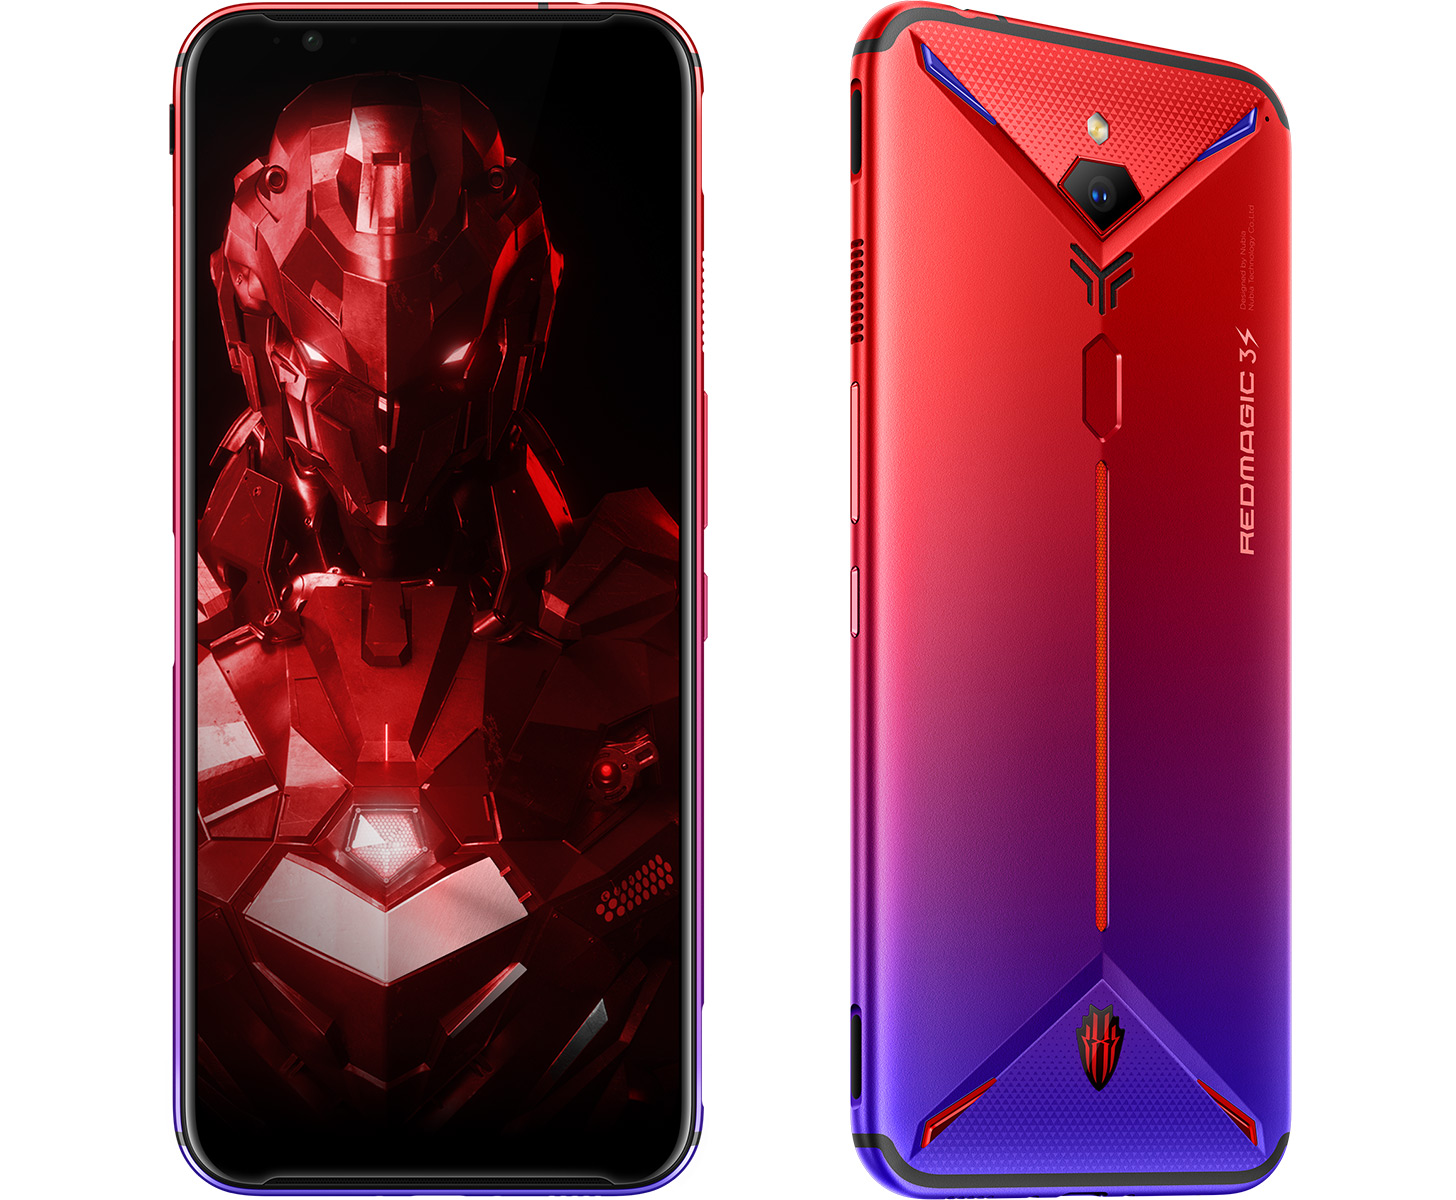 Red Magic 3S launching next week with Snapdragon 855+, 5000mAh battery ...